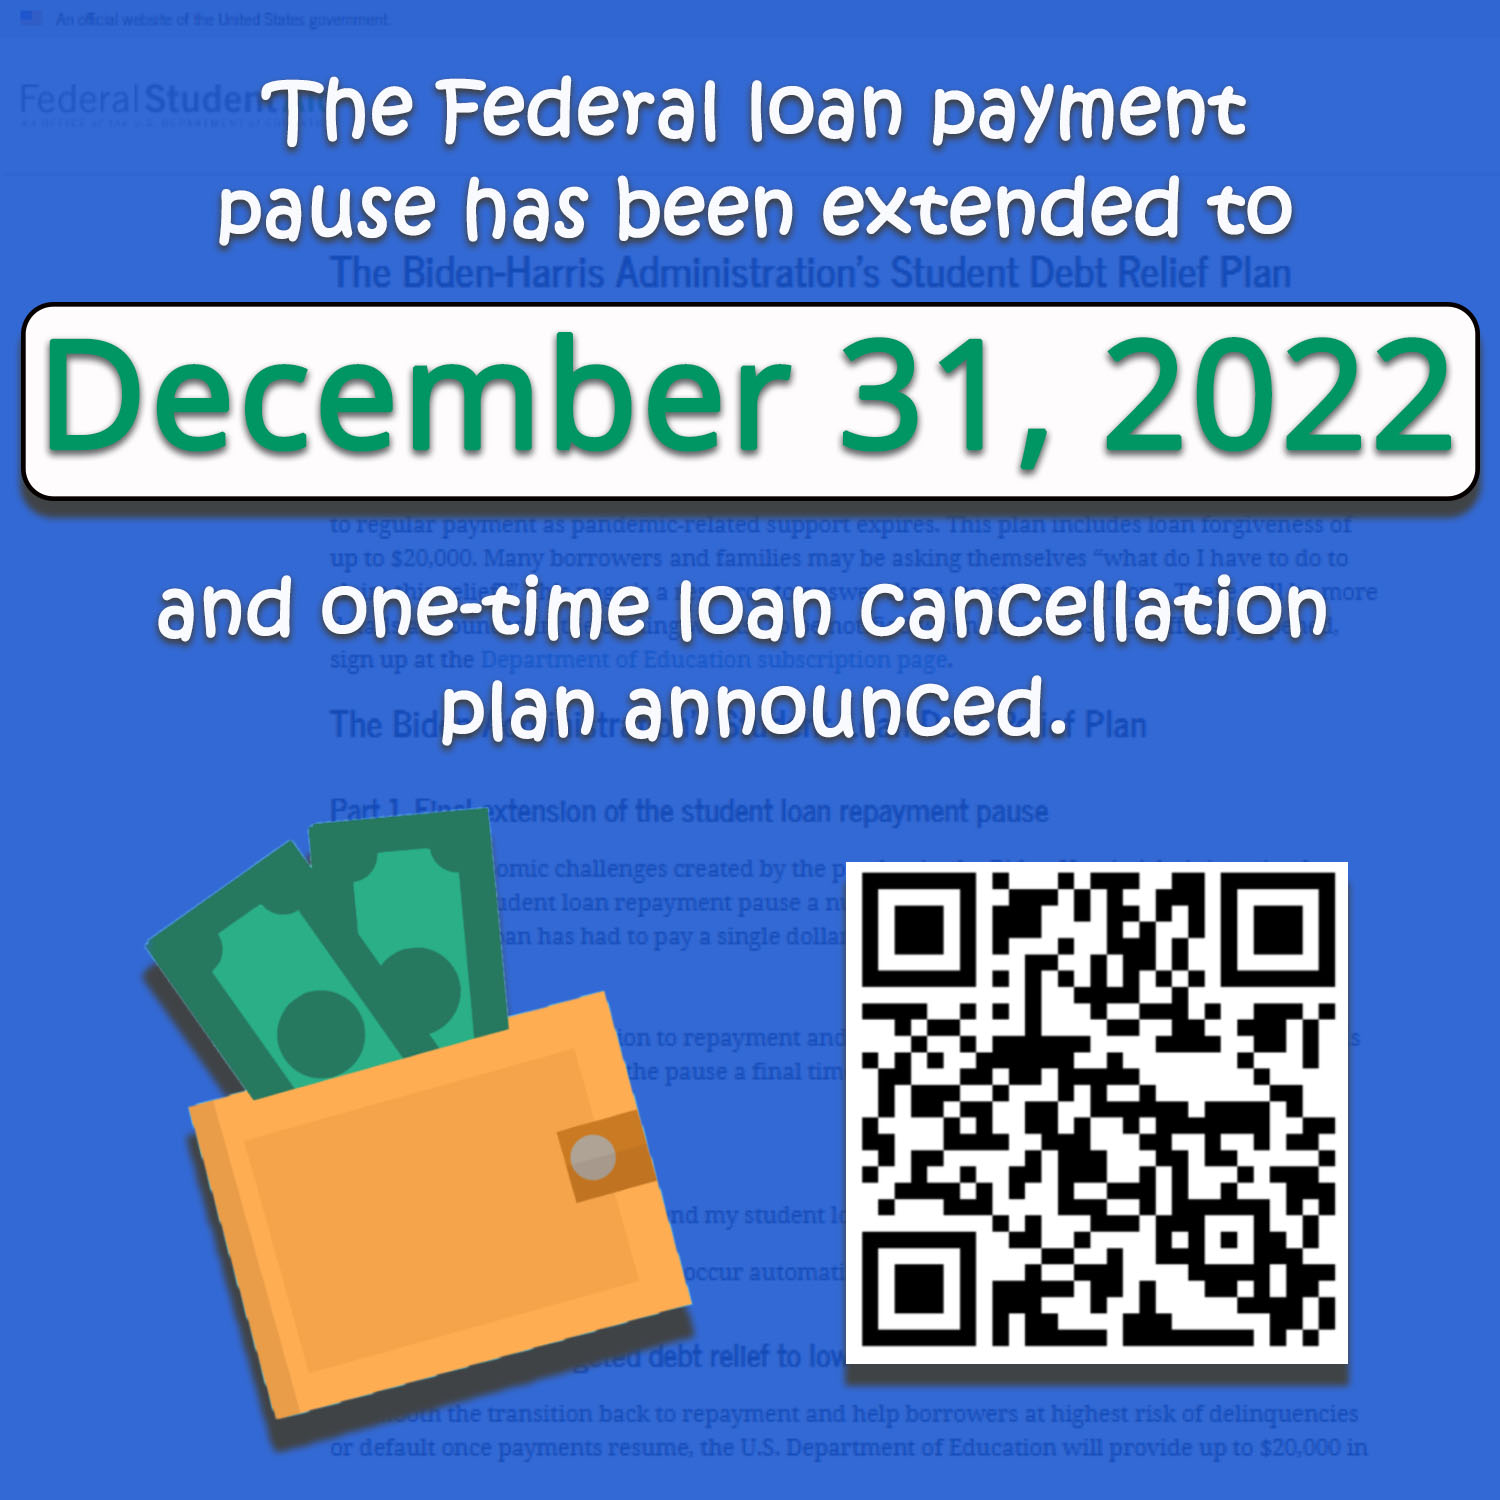 Federal Loan payment pause and cancellation.